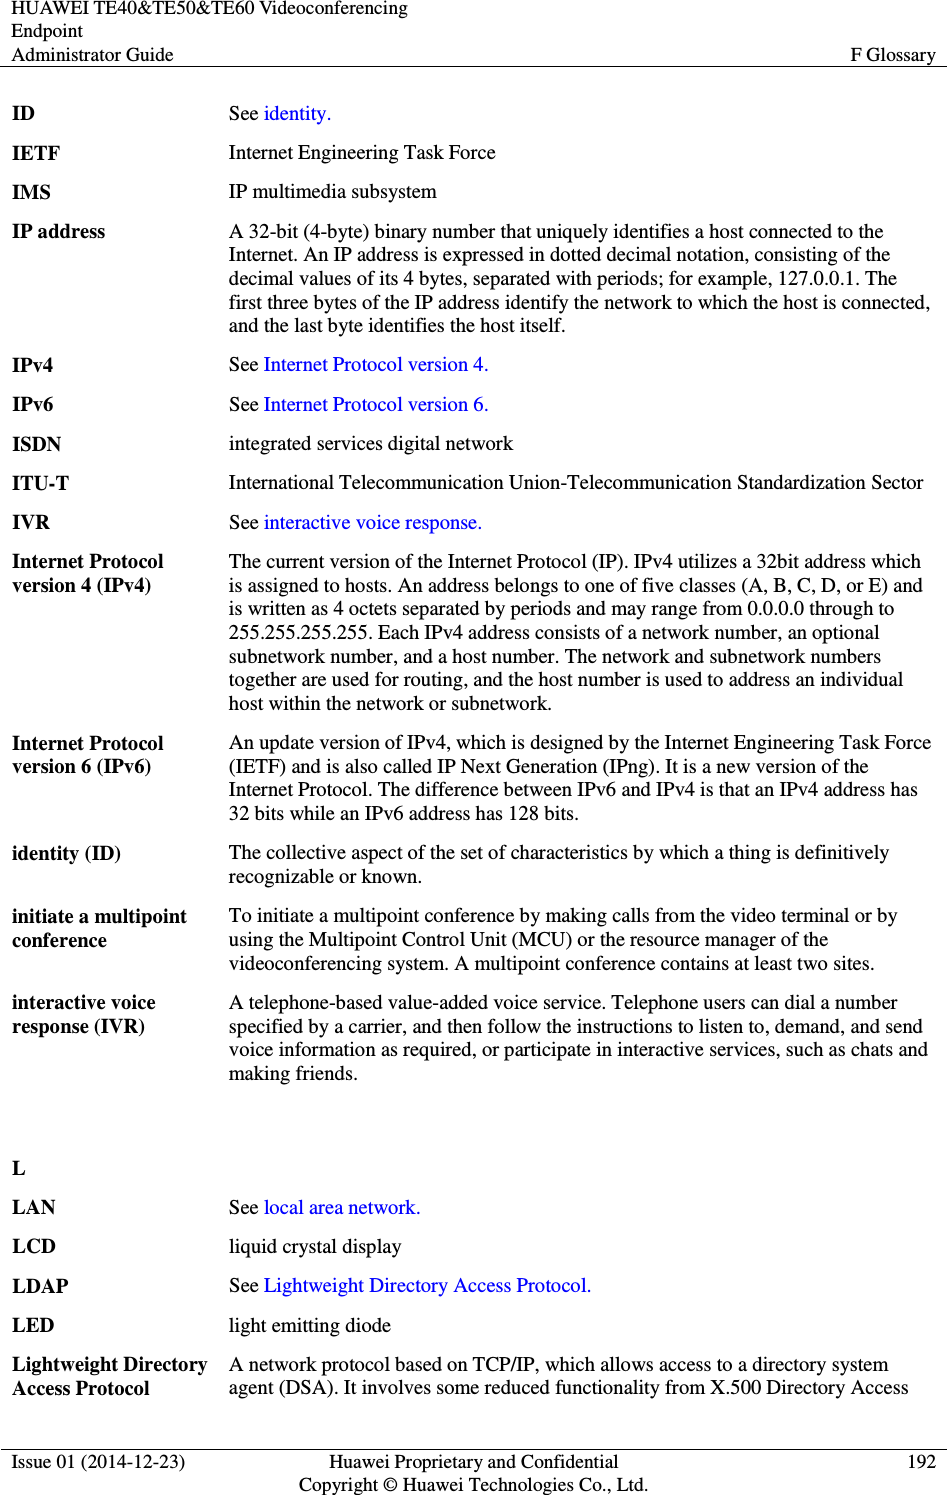 HUAWEI TE40&amp;TE50&amp;TE60 Videoconferencing Endpoint Administrator Guide  F Glossary  Issue 01 (2014-12-23)  Huawei Proprietary and Confidential                                     Copyright © Huawei Technologies Co., Ltd. 192  ID See identity. IETF Internet Engineering Task Force IMS IP multimedia subsystem IP address A 32-bit (4-byte) binary number that uniquely identifies a host connected to the Internet. An IP address is expressed in dotted decimal notation, consisting of the decimal values of its 4 bytes, separated with periods; for example, 127.0.0.1. The first three bytes of the IP address identify the network to which the host is connected, and the last byte identifies the host itself. IPv4 See Internet Protocol version 4. IPv6 See Internet Protocol version 6. ISDN integrated services digital network ITU-T International Telecommunication Union-Telecommunication Standardization Sector IVR See interactive voice response. Internet Protocol version 4 (IPv4) The current version of the Internet Protocol (IP). IPv4 utilizes a 32bit address which is assigned to hosts. An address belongs to one of five classes (A, B, C, D, or E) and is written as 4 octets separated by periods and may range from 0.0.0.0 through to 255.255.255.255. Each IPv4 address consists of a network number, an optional subnetwork number, and a host number. The network and subnetwork numbers together are used for routing, and the host number is used to address an individual host within the network or subnetwork. Internet Protocol version 6 (IPv6) An update version of IPv4, which is designed by the Internet Engineering Task Force (IETF) and is also called IP Next Generation (IPng). It is a new version of the Internet Protocol. The difference between IPv6 and IPv4 is that an IPv4 address has 32 bits while an IPv6 address has 128 bits. identity (ID) The collective aspect of the set of characteristics by which a thing is definitively recognizable or known. initiate a multipoint conference To initiate a multipoint conference by making calls from the video terminal or by using the Multipoint Control Unit (MCU) or the resource manager of the videoconferencing system. A multipoint conference contains at least two sites. interactive voice response (IVR) A telephone-based value-added voice service. Telephone users can dial a number specified by a carrier, and then follow the instructions to listen to, demand, and send voice information as required, or participate in interactive services, such as chats and making friends.   L  LAN See local area network. LCD liquid crystal display LDAP See Lightweight Directory Access Protocol. LED light emitting diode Lightweight Directory Access Protocol A network protocol based on TCP/IP, which allows access to a directory system agent (DSA). It involves some reduced functionality from X.500 Directory Access 